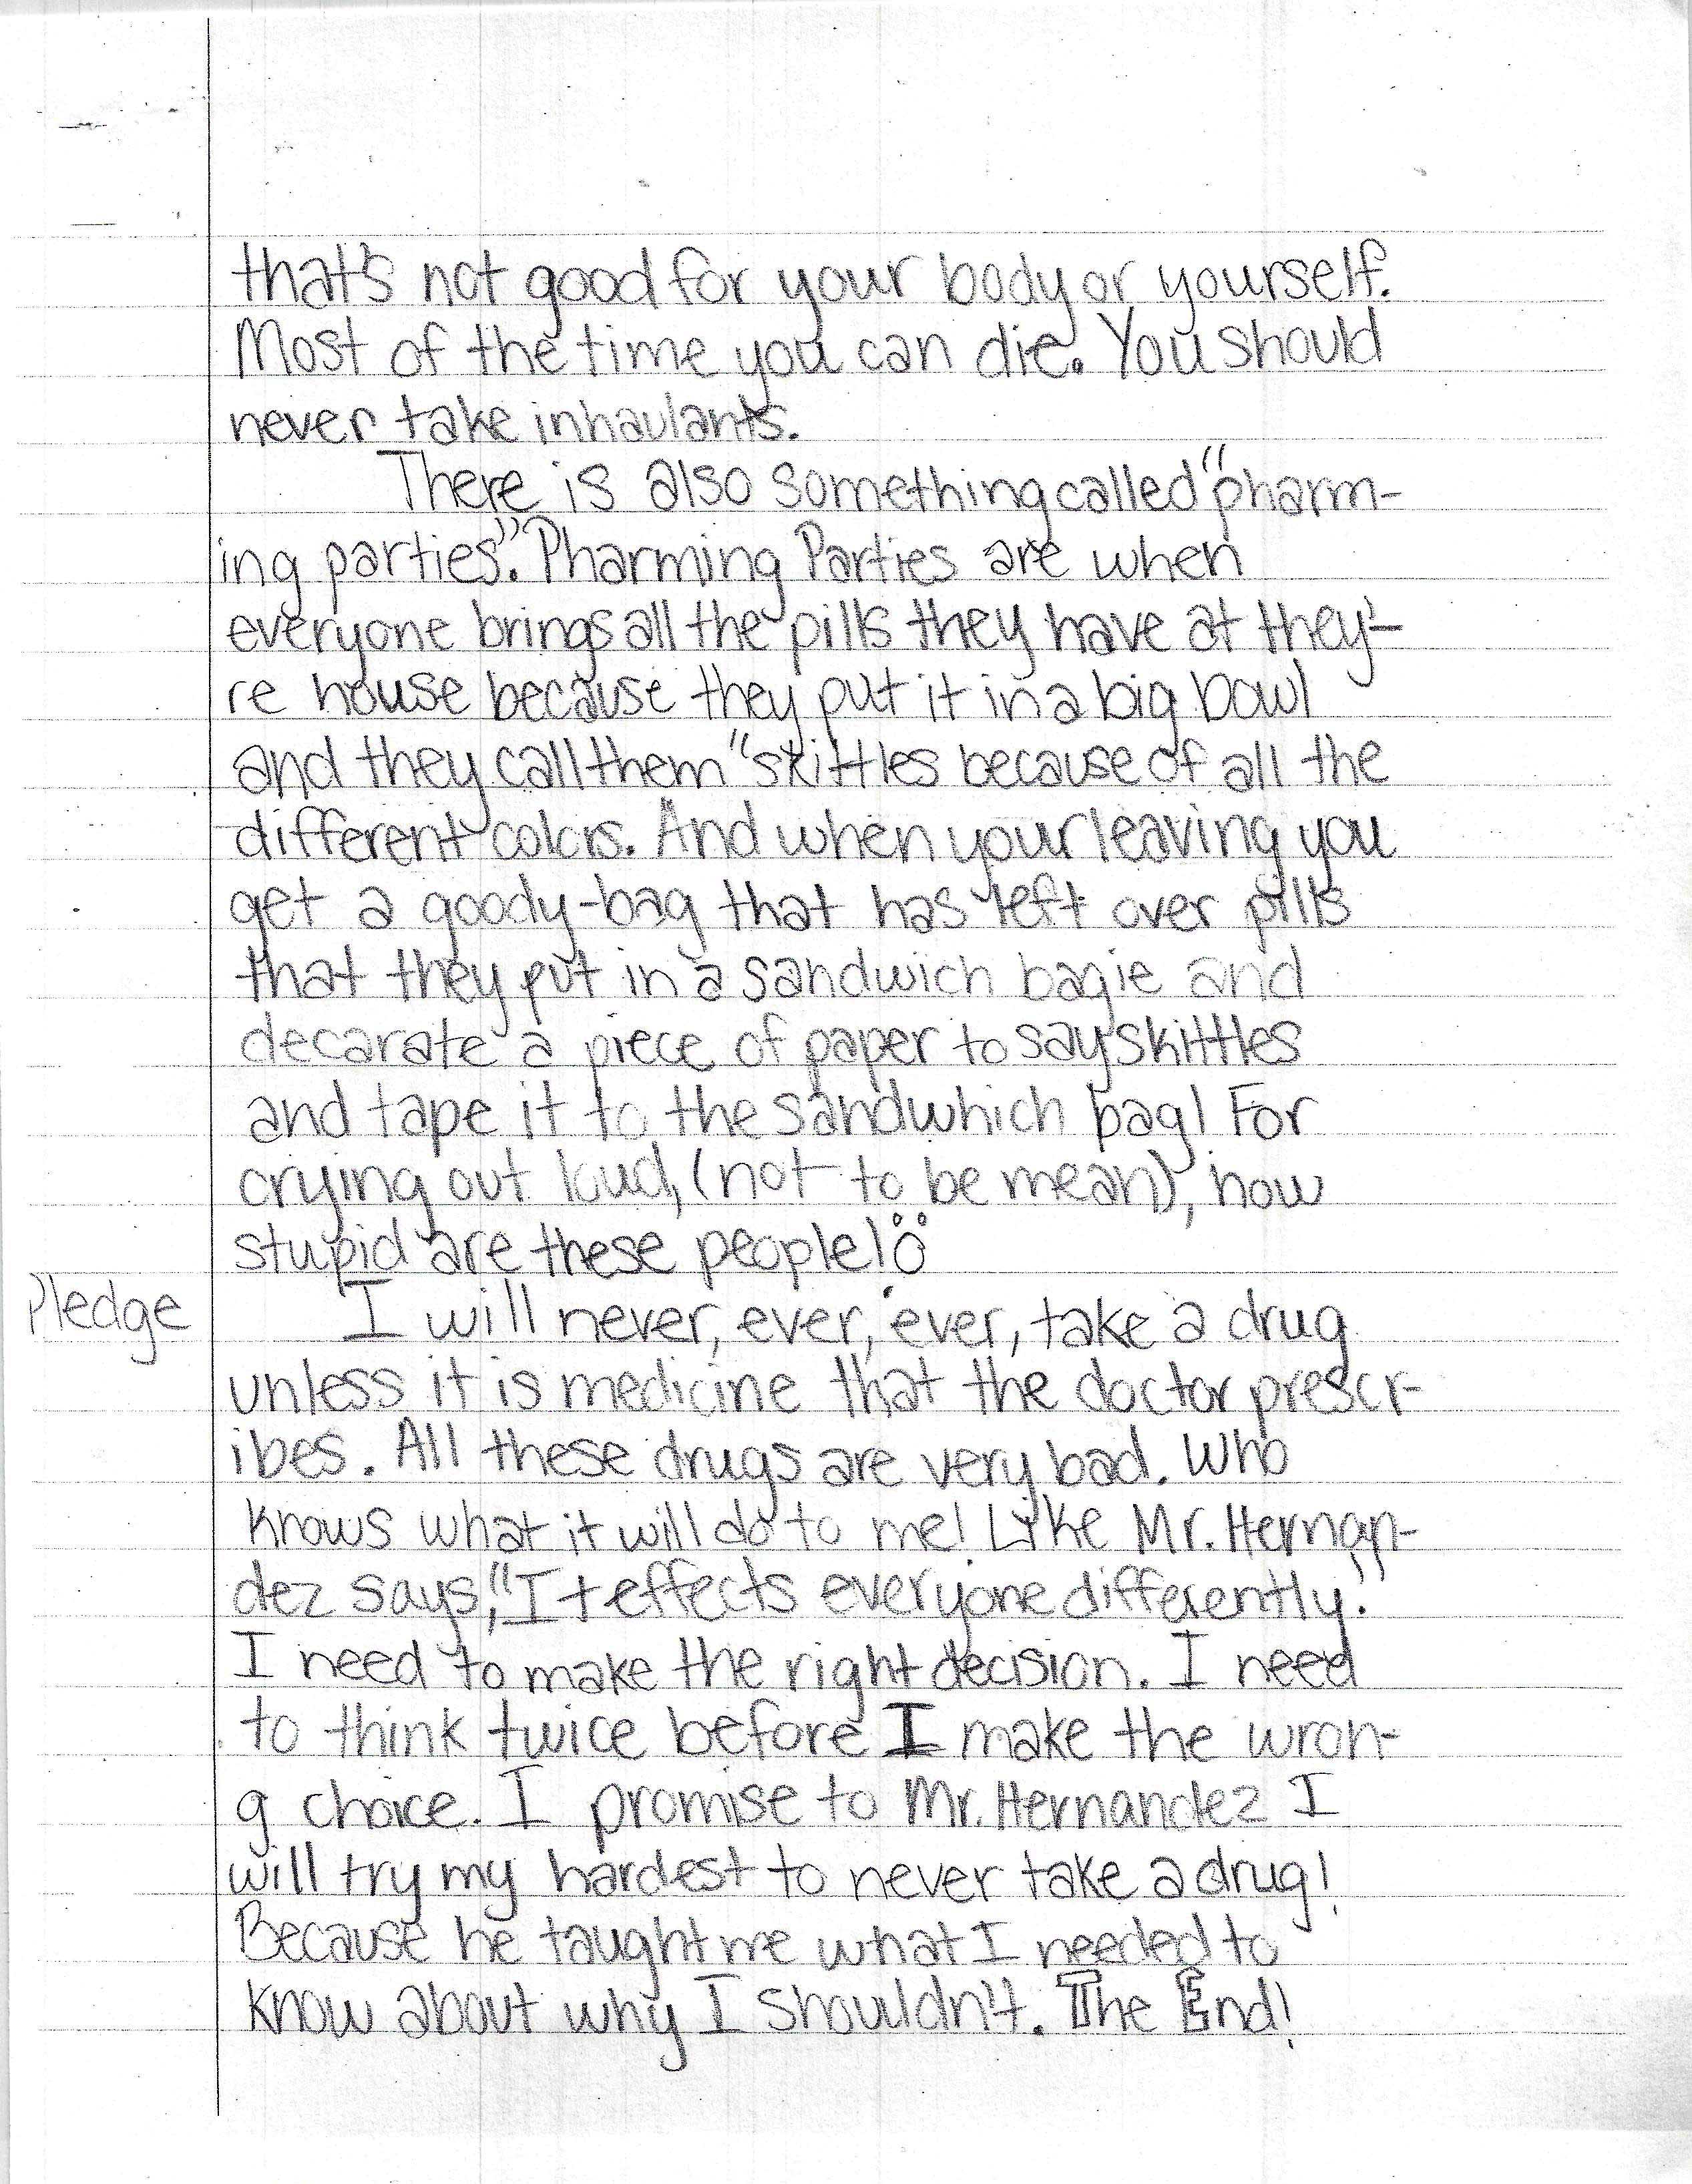 A 5 paragraph essay on bullying